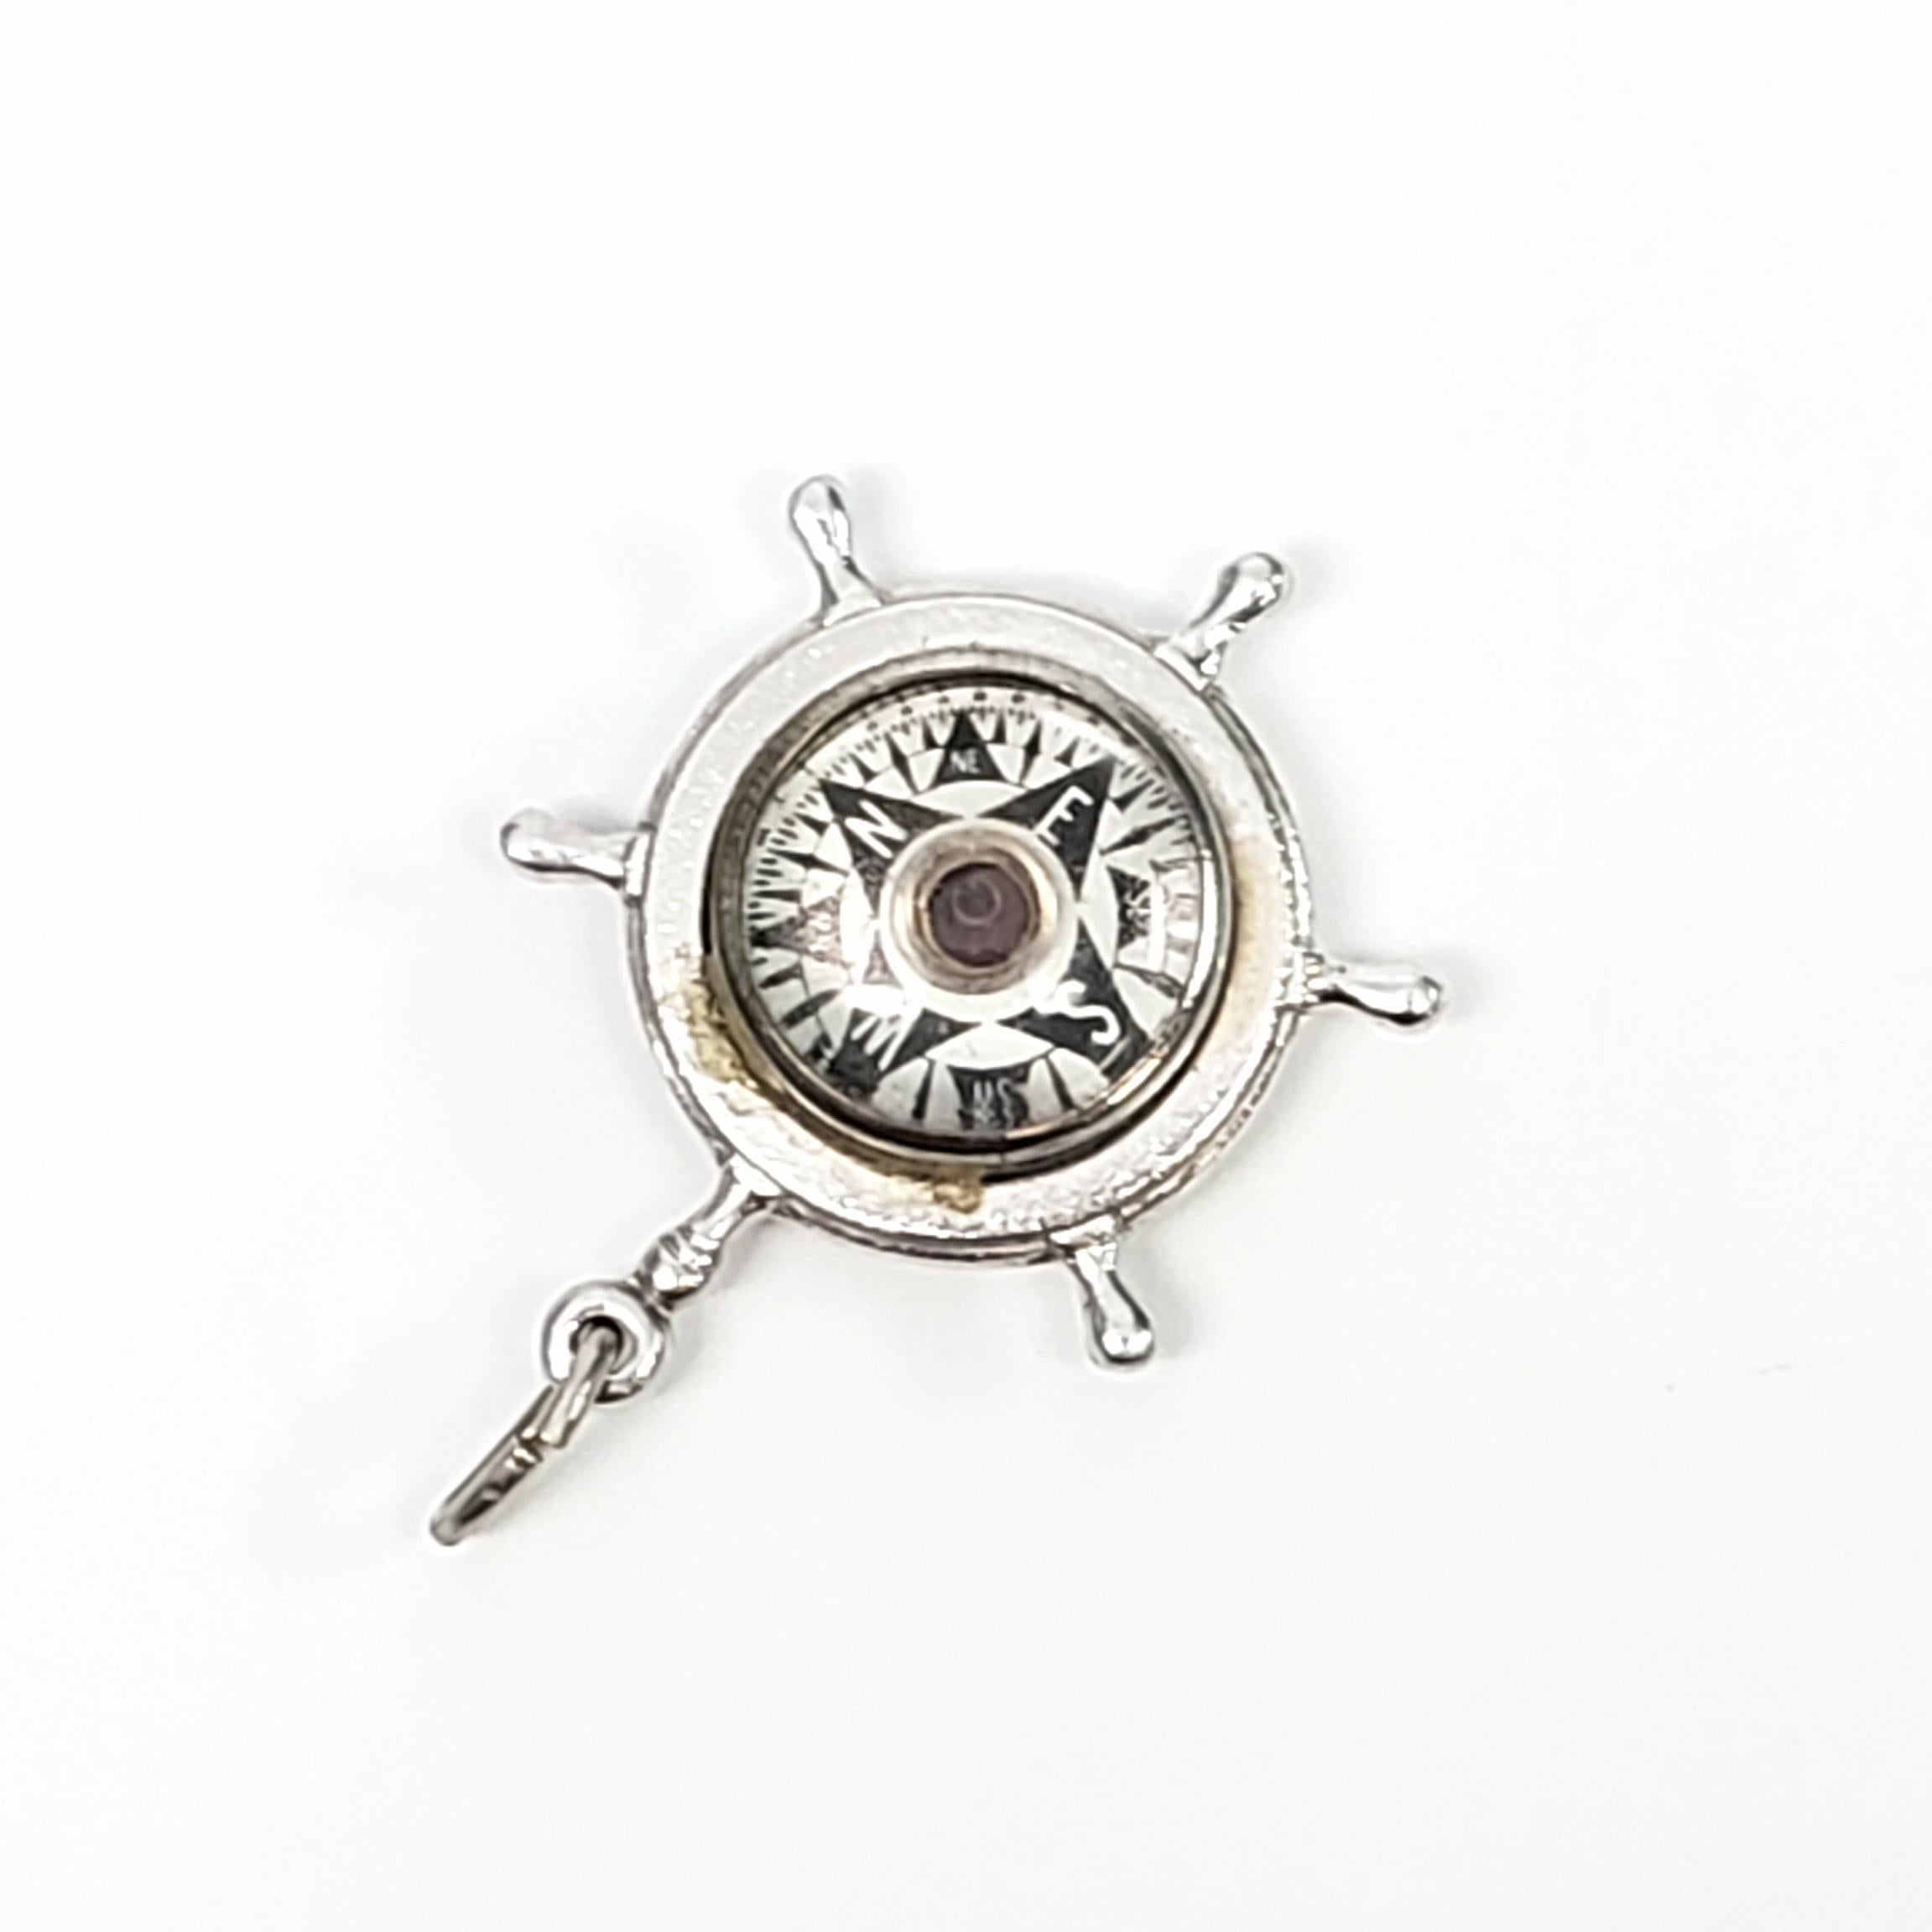 Vintage sterling silver ship's wheel charm with working compass by His Lordship Product Co. of NYC, circa 1957.

His Lordship Products Co. crafted custom jewelry in the 1960's, most were nautically themed items made of sterling, to an affluent